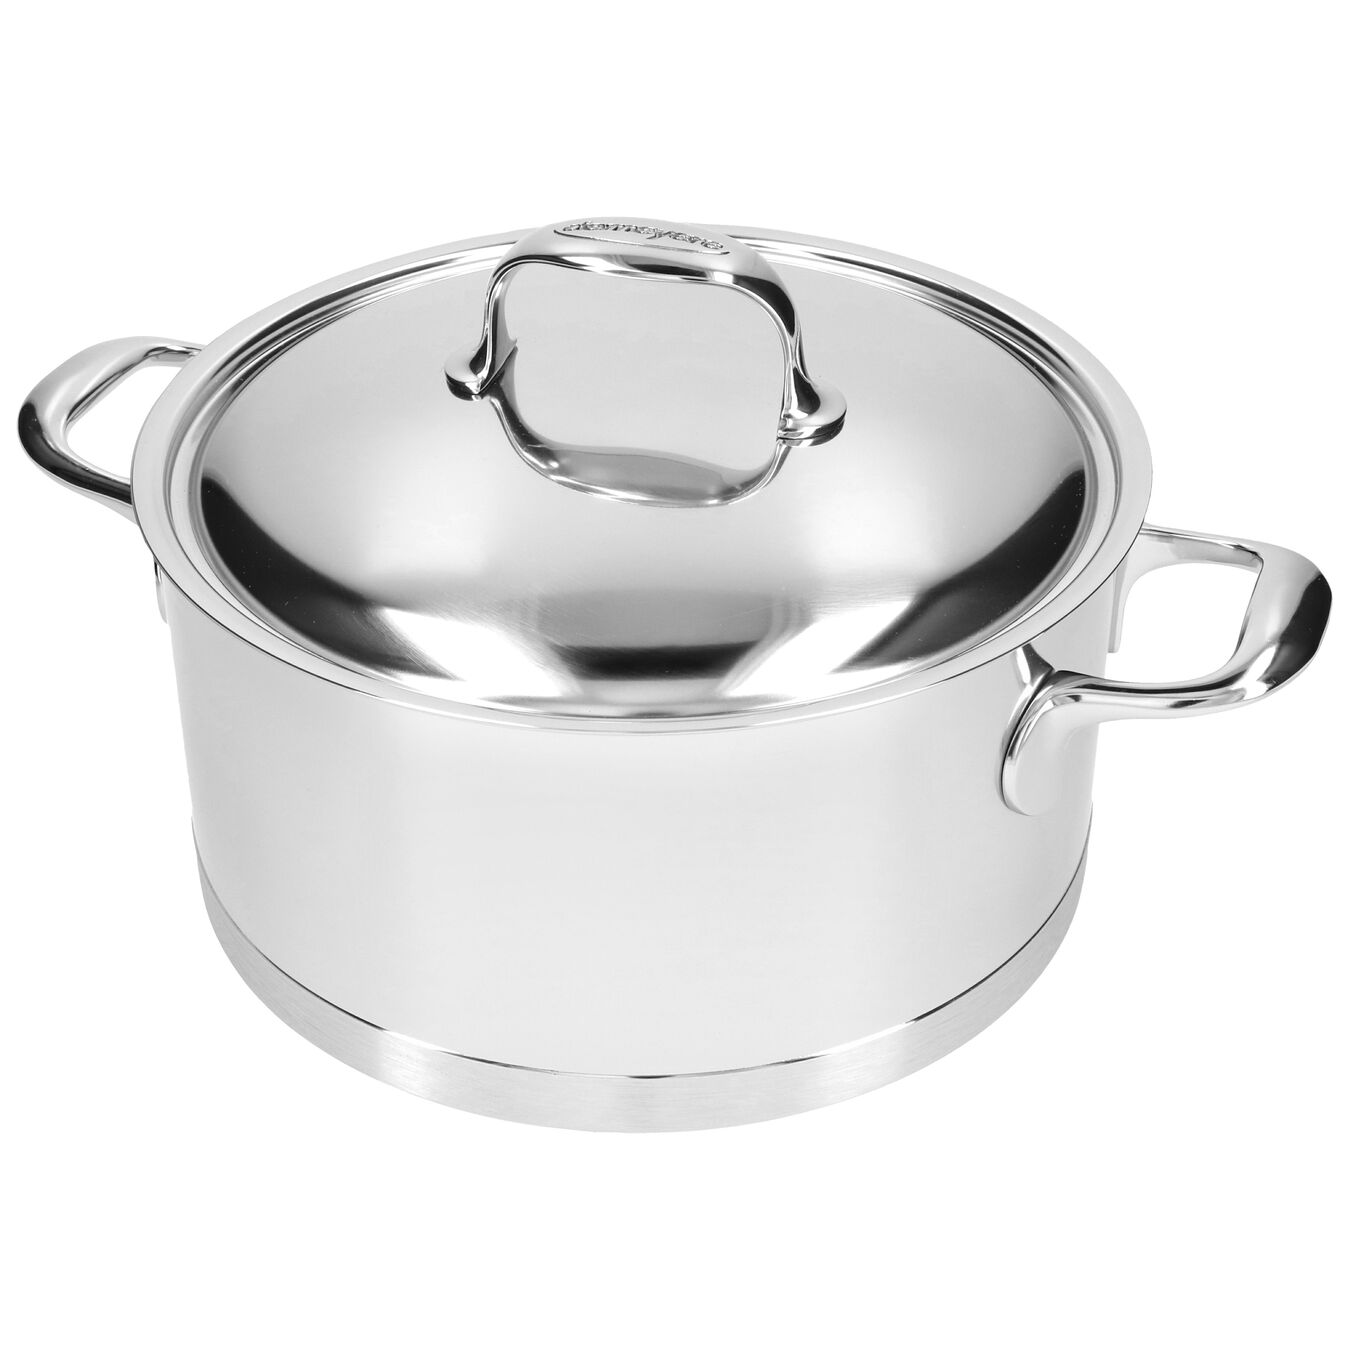 24 cm 18/10 Stainless Steel Stew pot with lid silver,,large 4